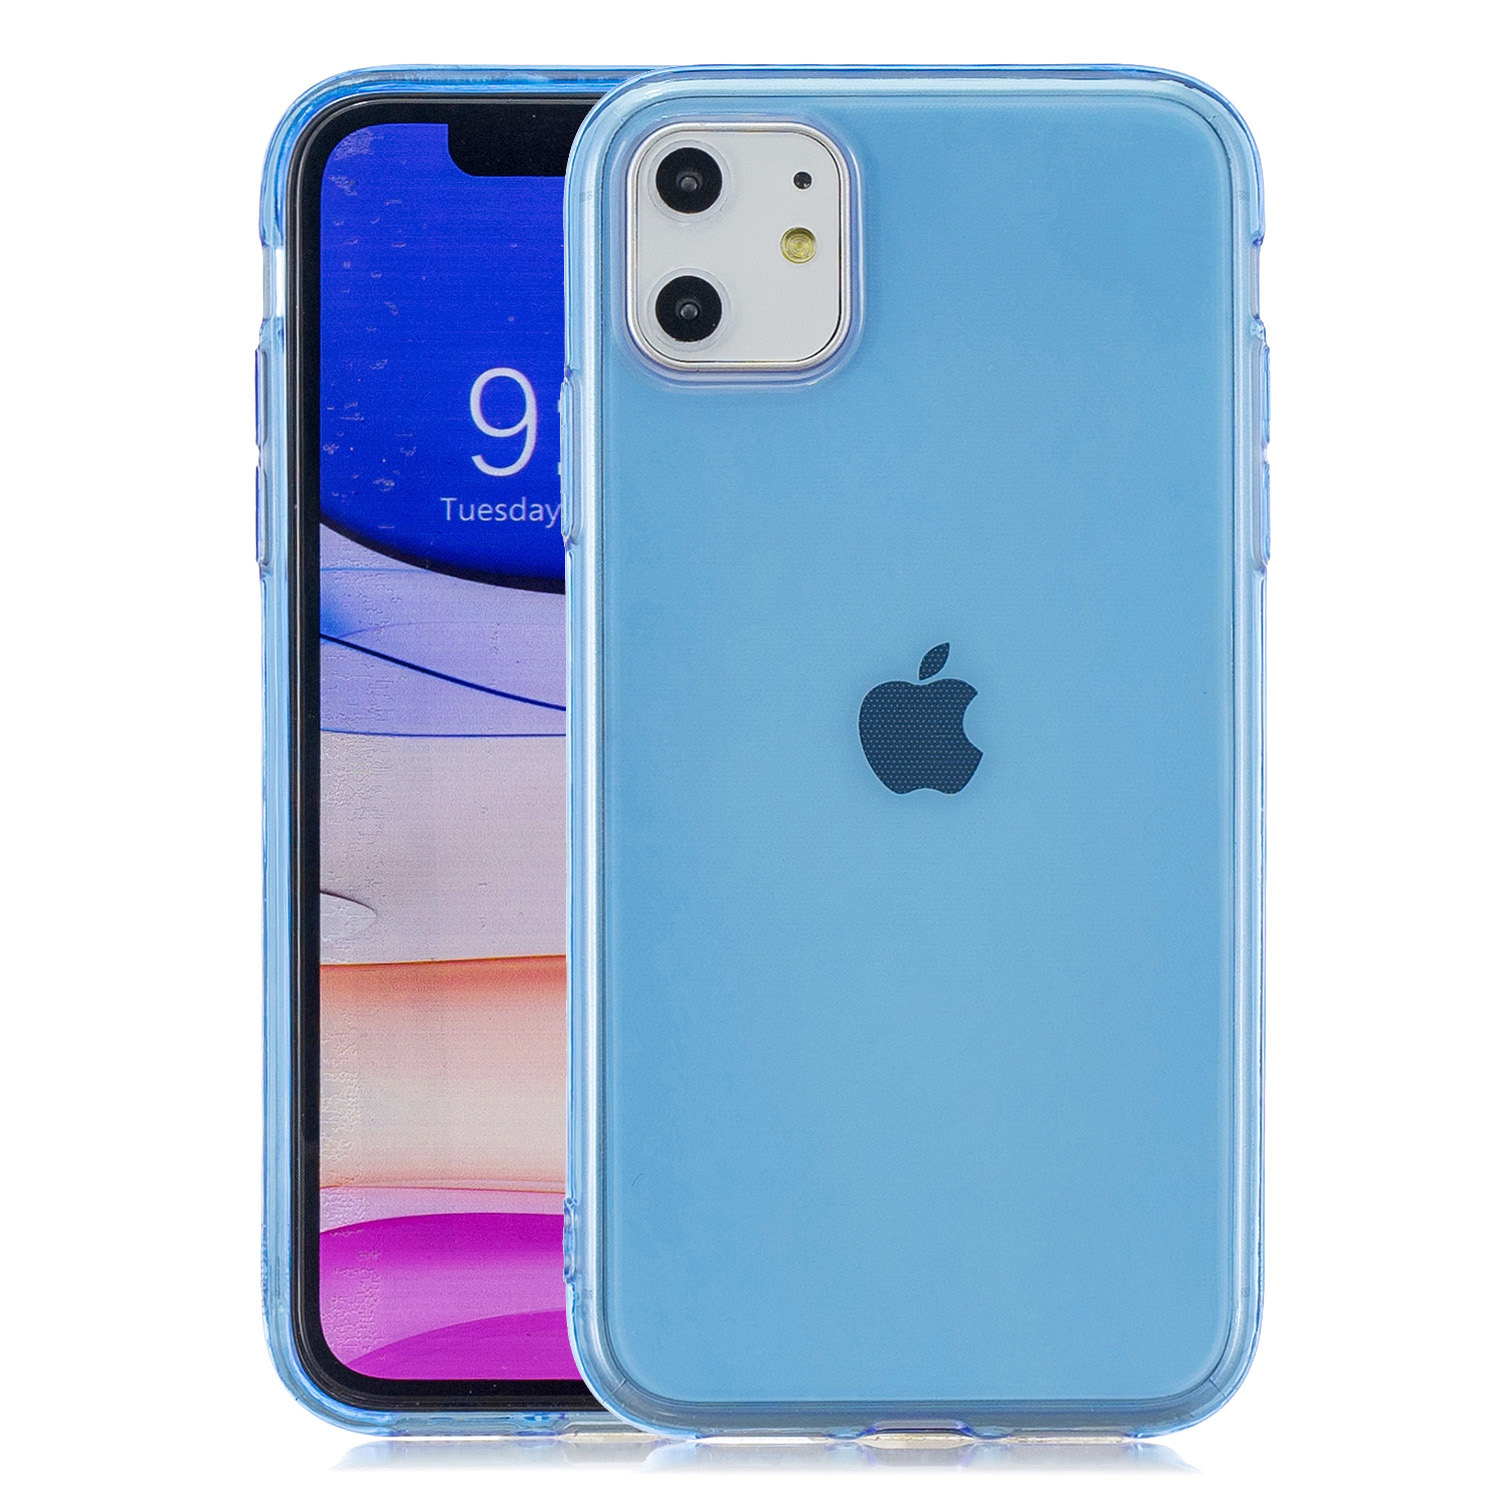 for iPhone 11 / 11 Pro / 11 Pro Max Clear Colorful TPU Back Cover Cellphone Case Shell Light blue